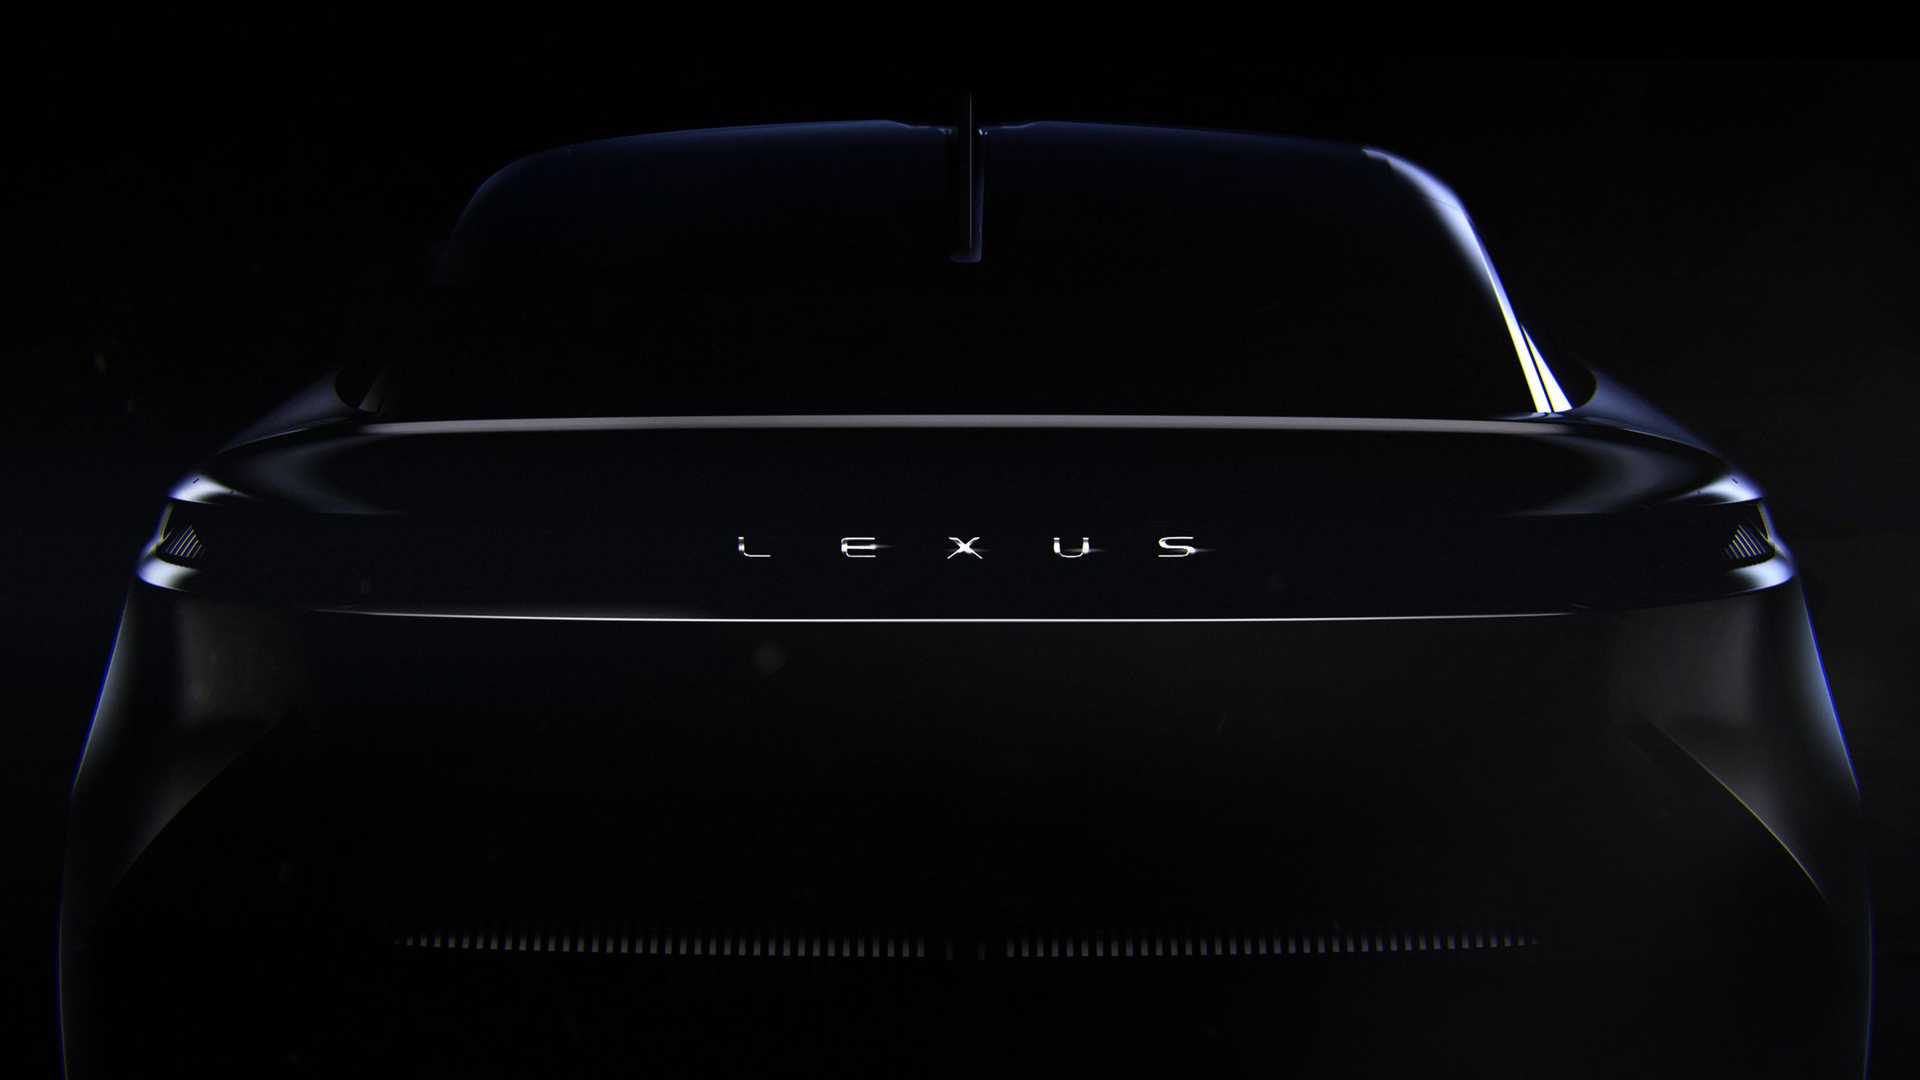 Lexus Teases Bold New Concept Car To Preview Brand Vision